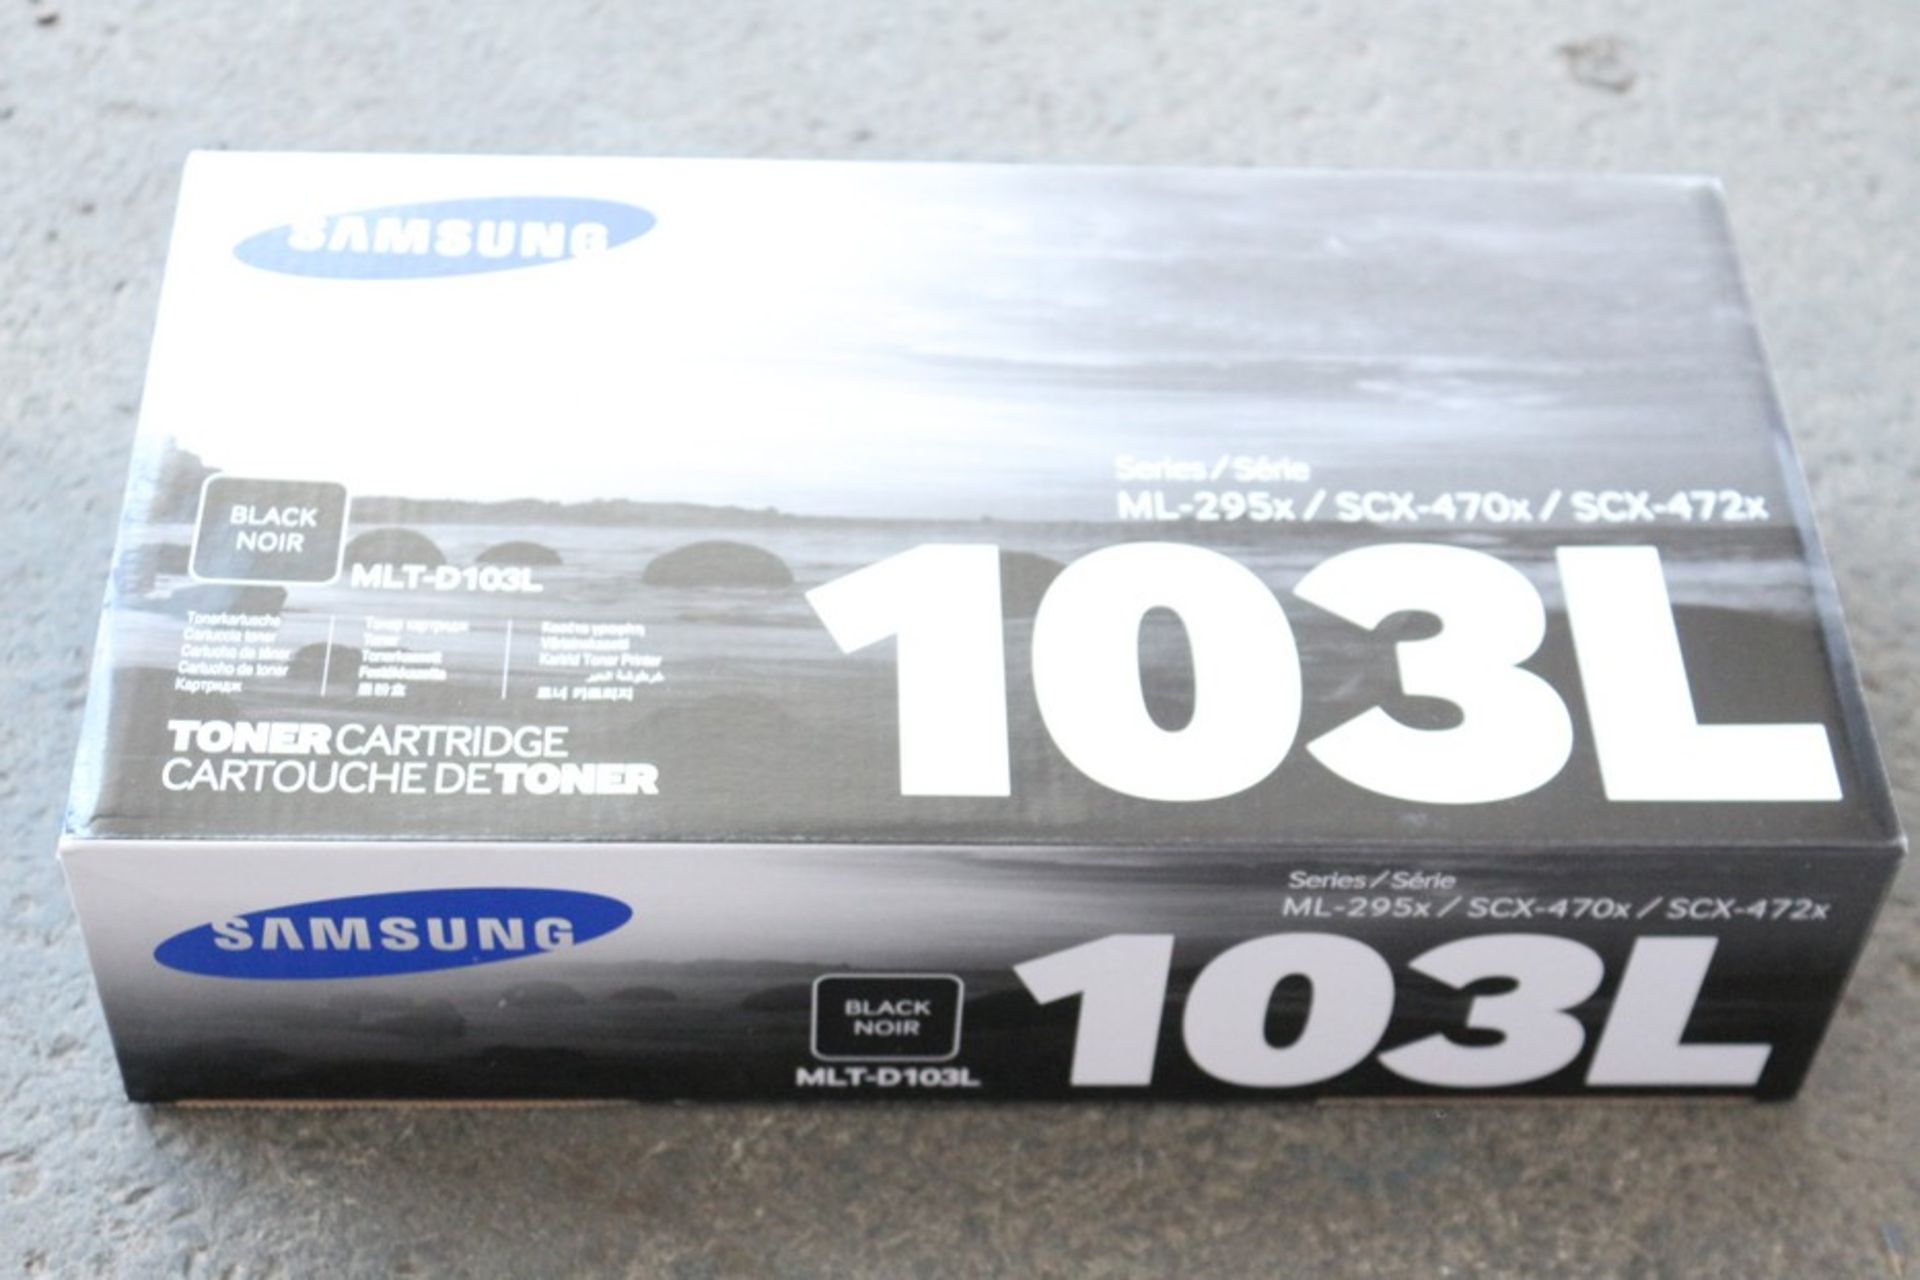 1X LOT TO CONTAIN 2 BOXED SAMSUNG 103L TONER CARTRIDGES IN BLACK (AC-G4B)